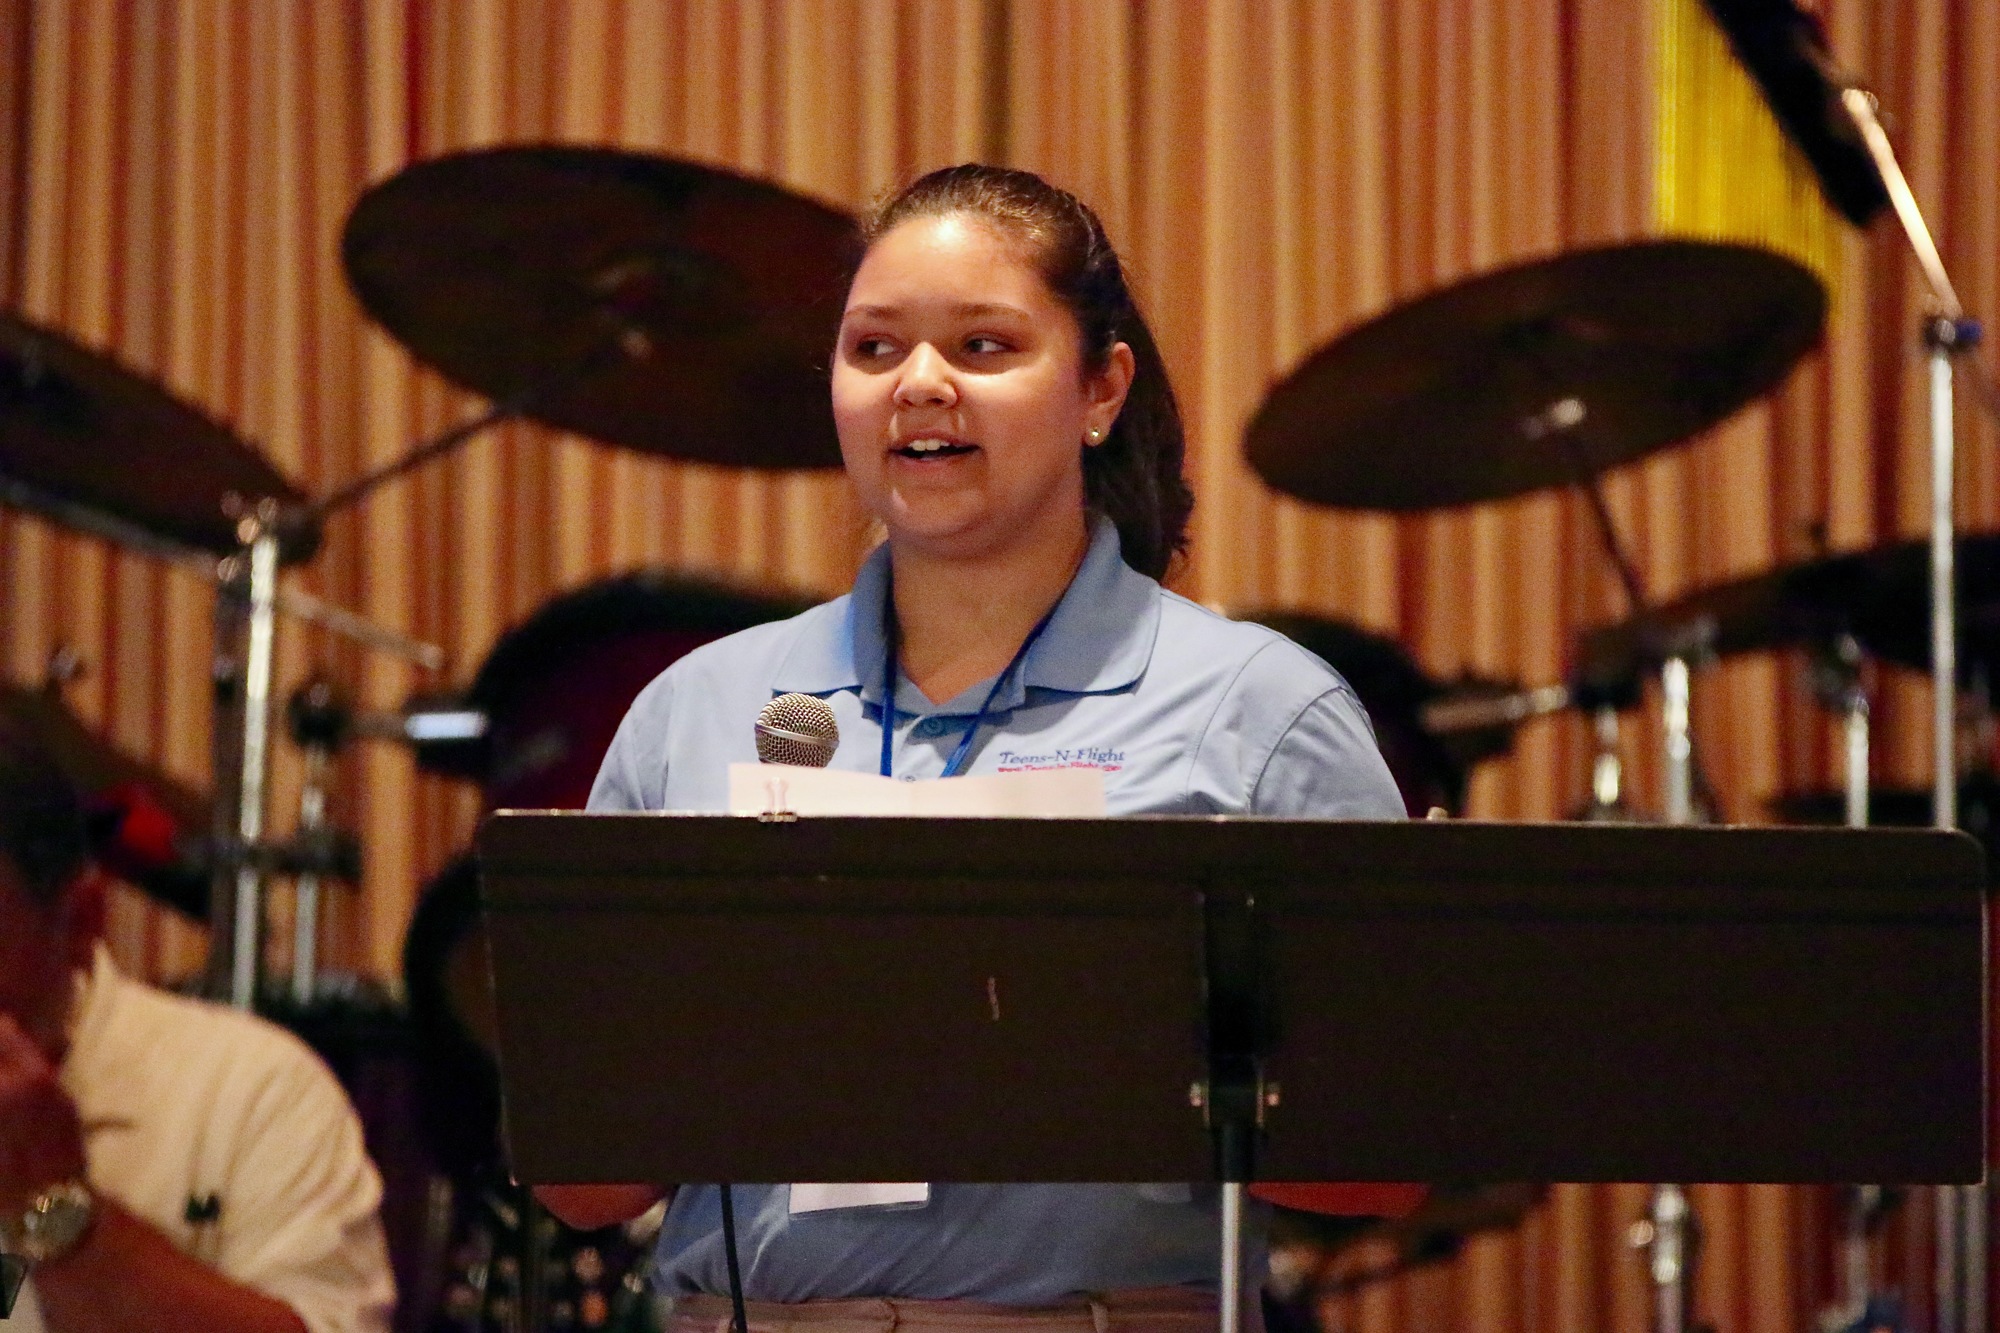 Teens-in-Flight student Carolyn Figueroa, 17 and a Flagler Palm Coast High School student dual-enrolled at Daytona State College, said she hopes to one day become an aeronautical science teacher. (Photo by Jonathan Simmons)